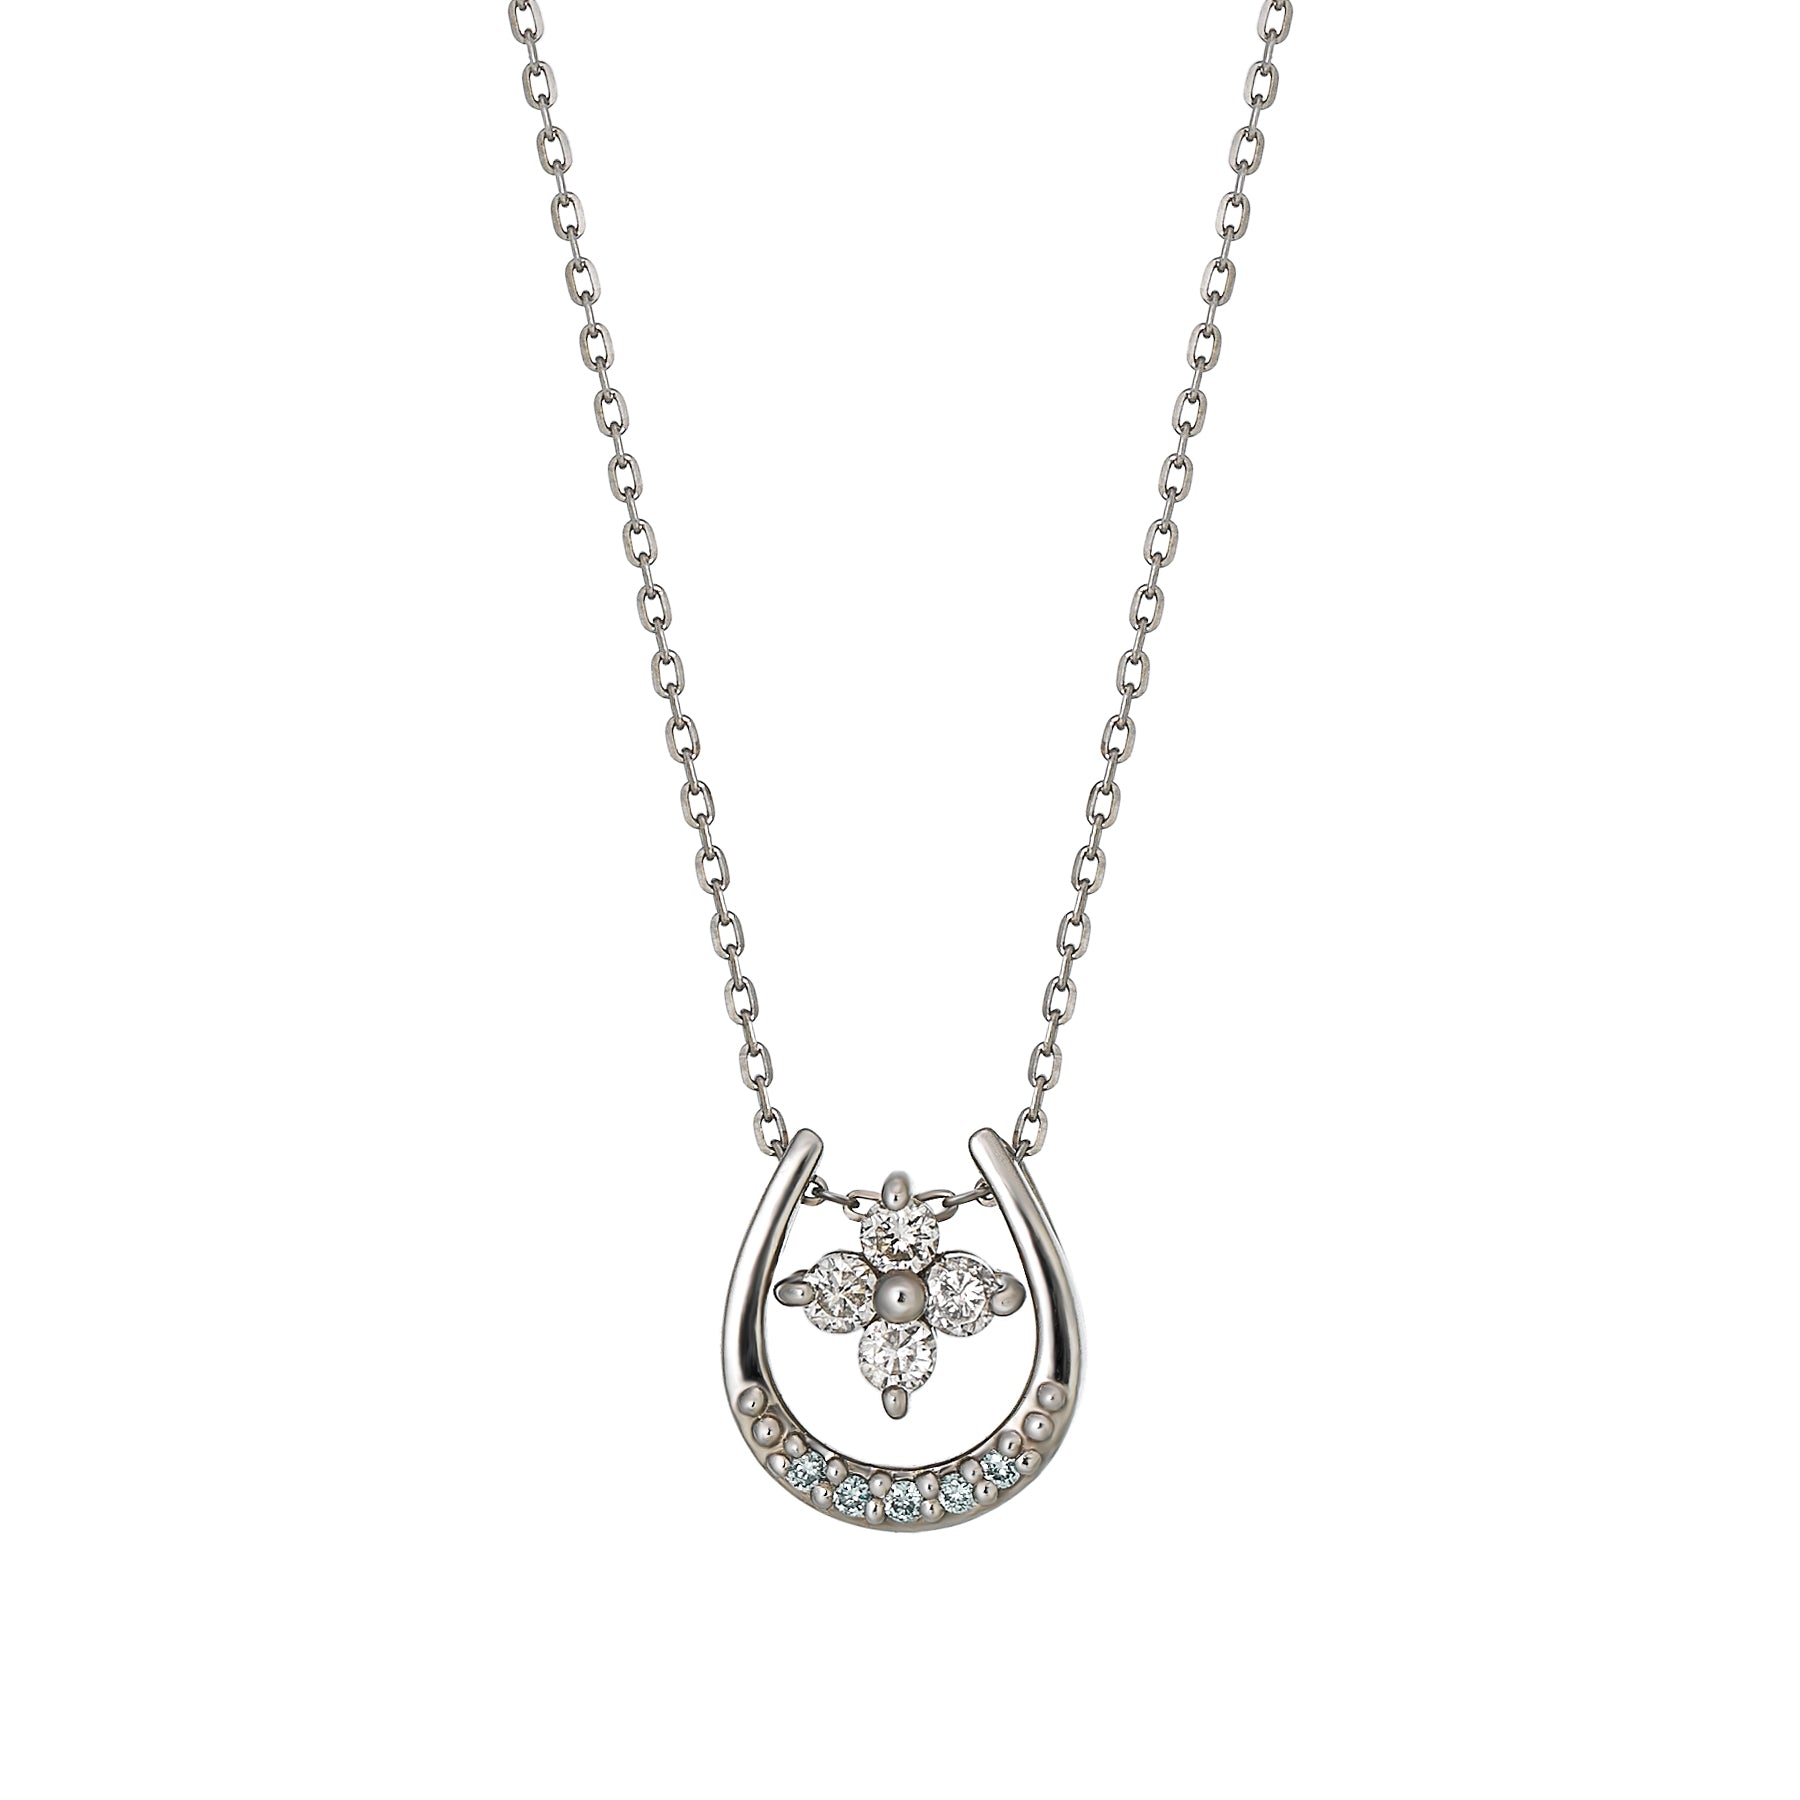 Platinum Diamond "Double Happiness" Necklace - 45th Anniversary Model - - Product Image